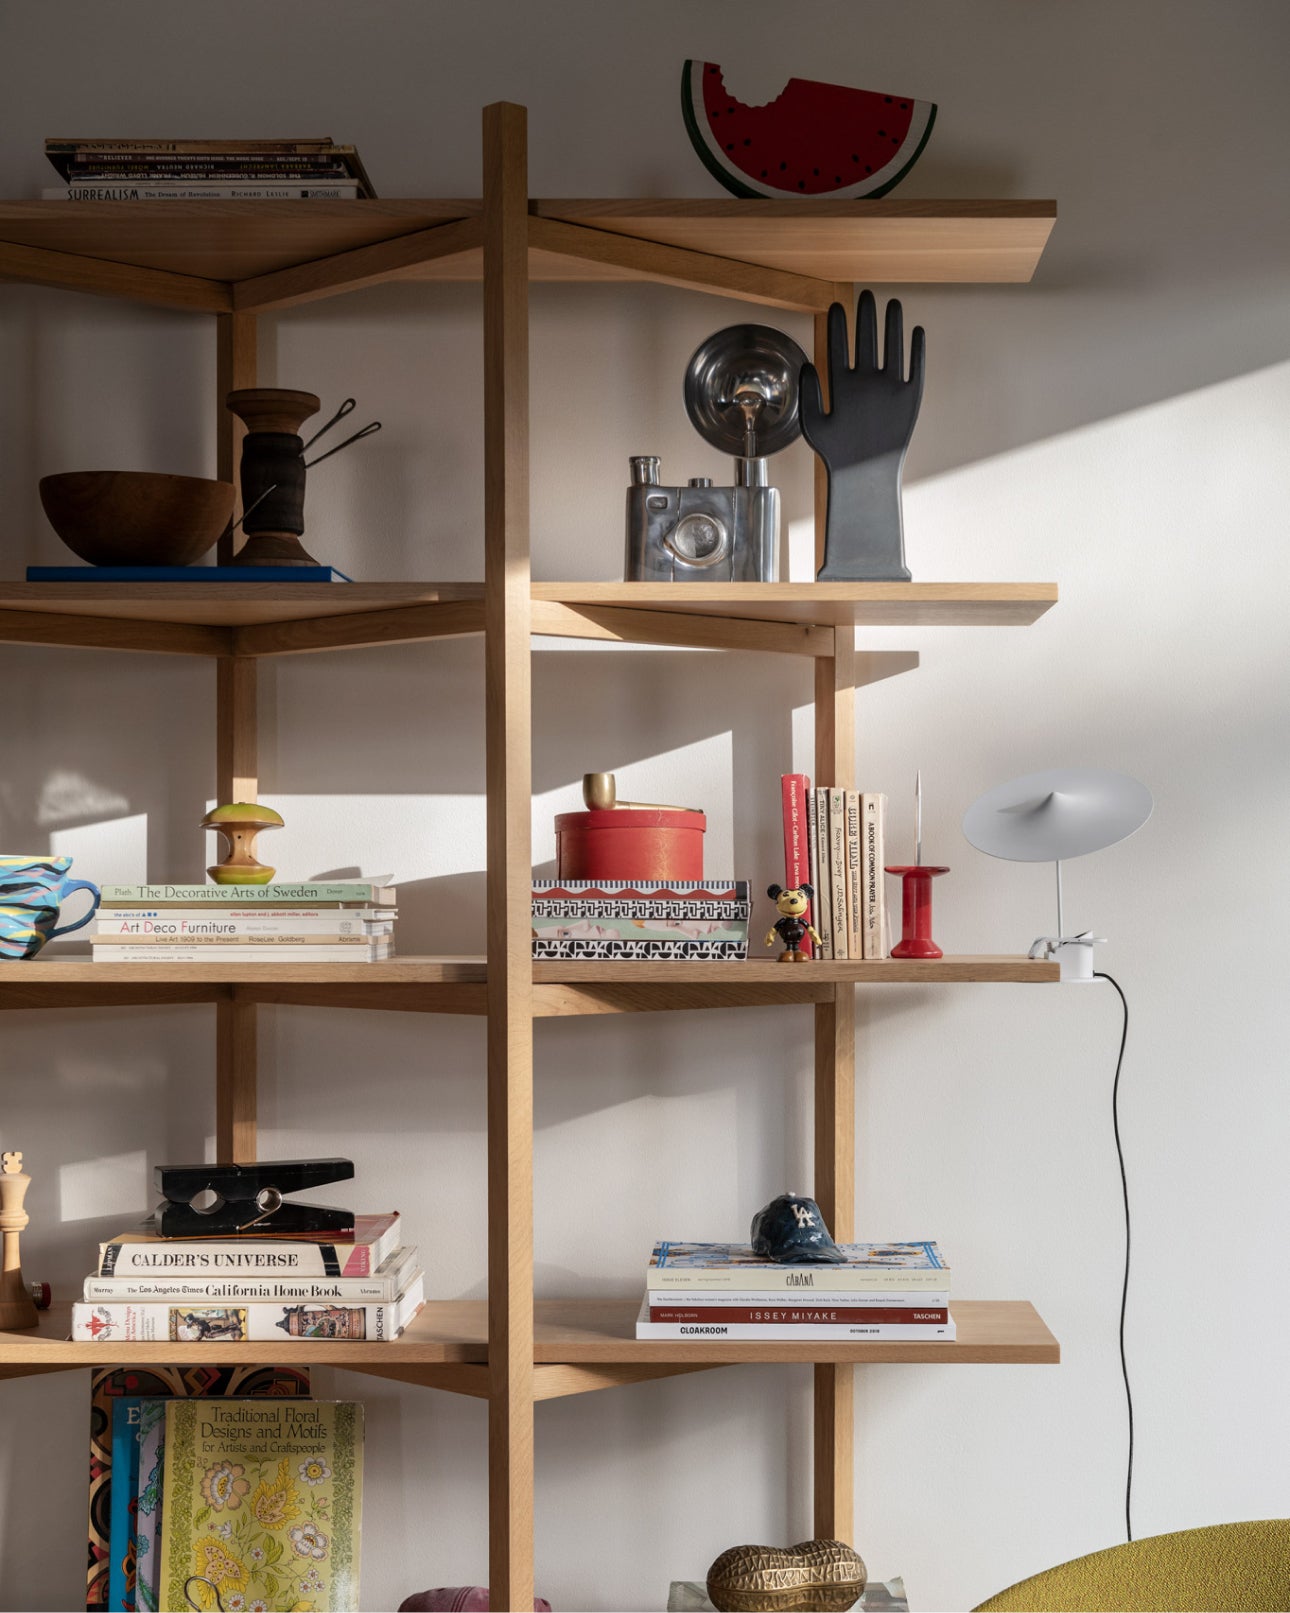 Close-up of Zig Zag High Shelf in Oak with accessories on the shelves